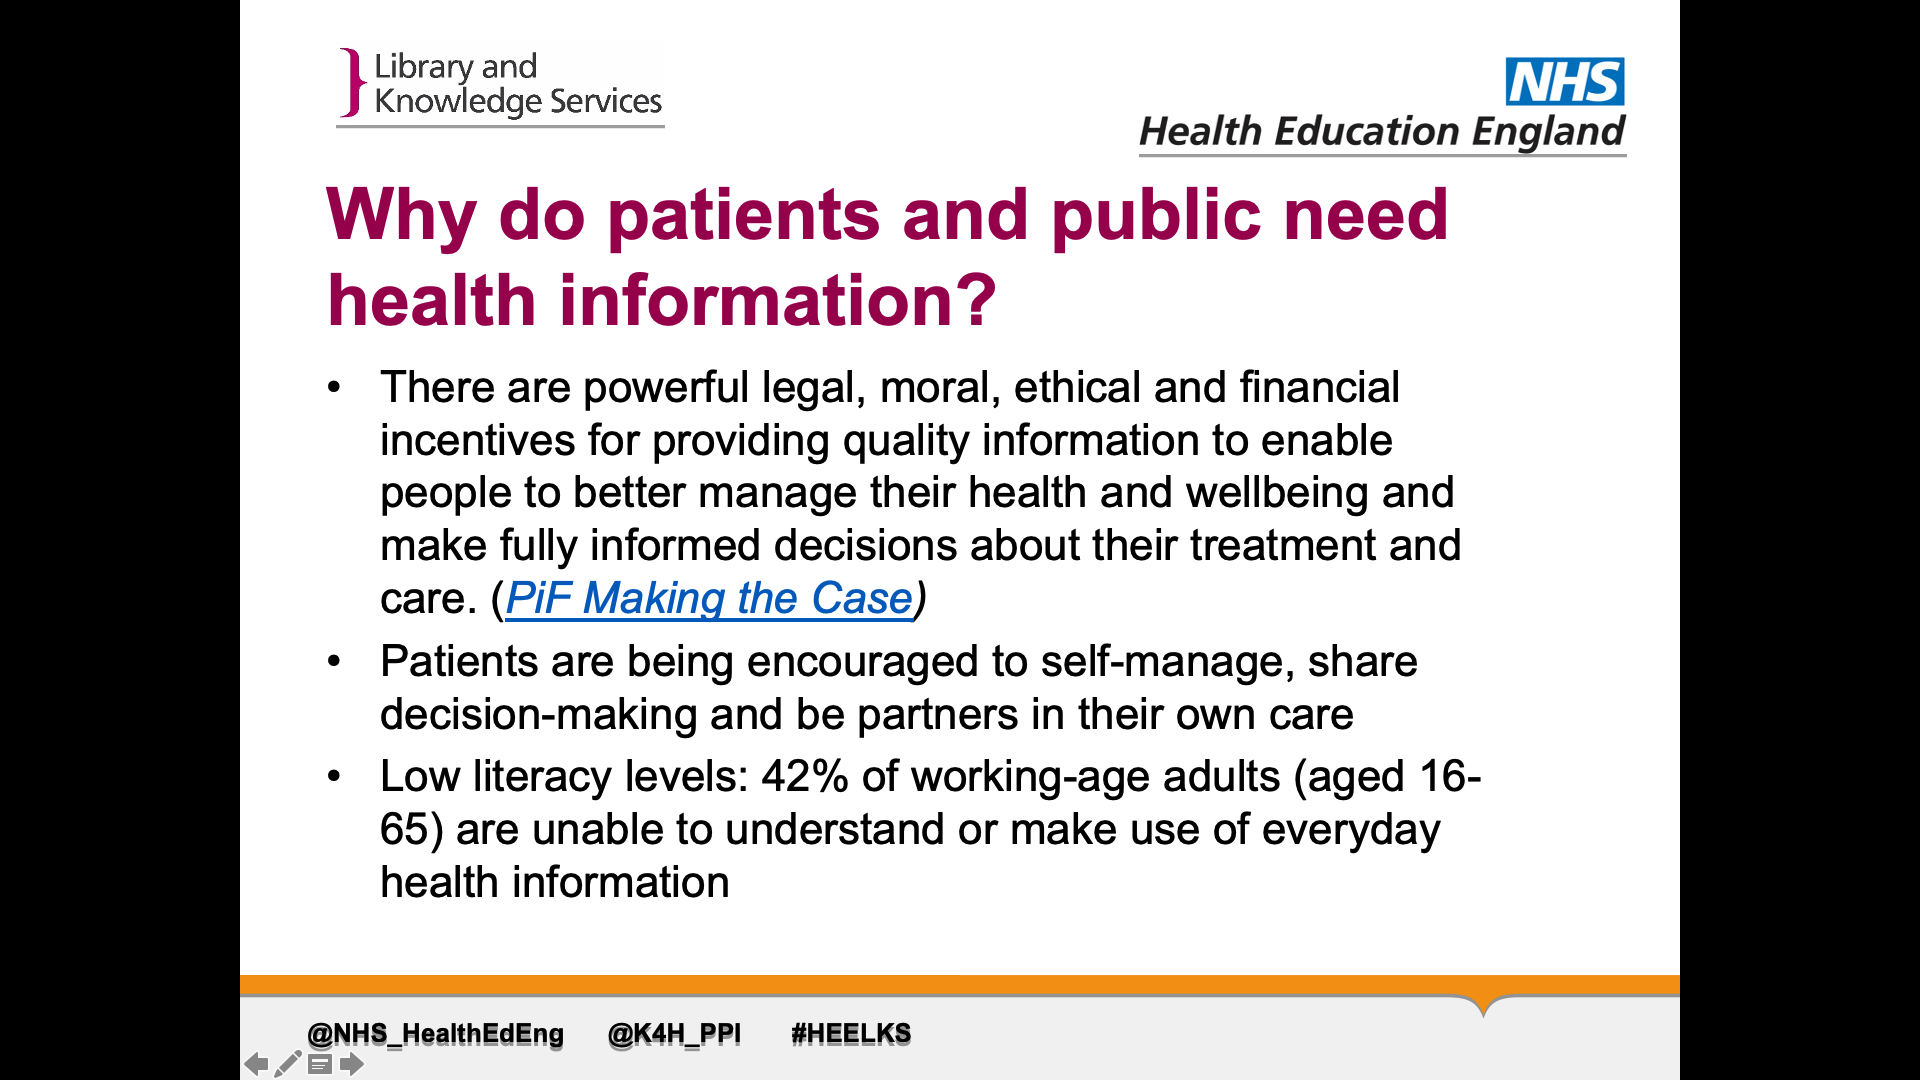 Title: Why do patients and public need health information? Text on page: 1. There are powerful legal, moral, ethical and financial incentives for providing quality information to enable people to better manage their health and wellbeing and make fully informed decisions about their treatment and care. 2. Patients are being encouraged to self-manage, share decision-making and be partners in their own care. 3. Low literacy levels: 42% of working-age adults (aged 16-65) are unable to understand or make use of everyday health information